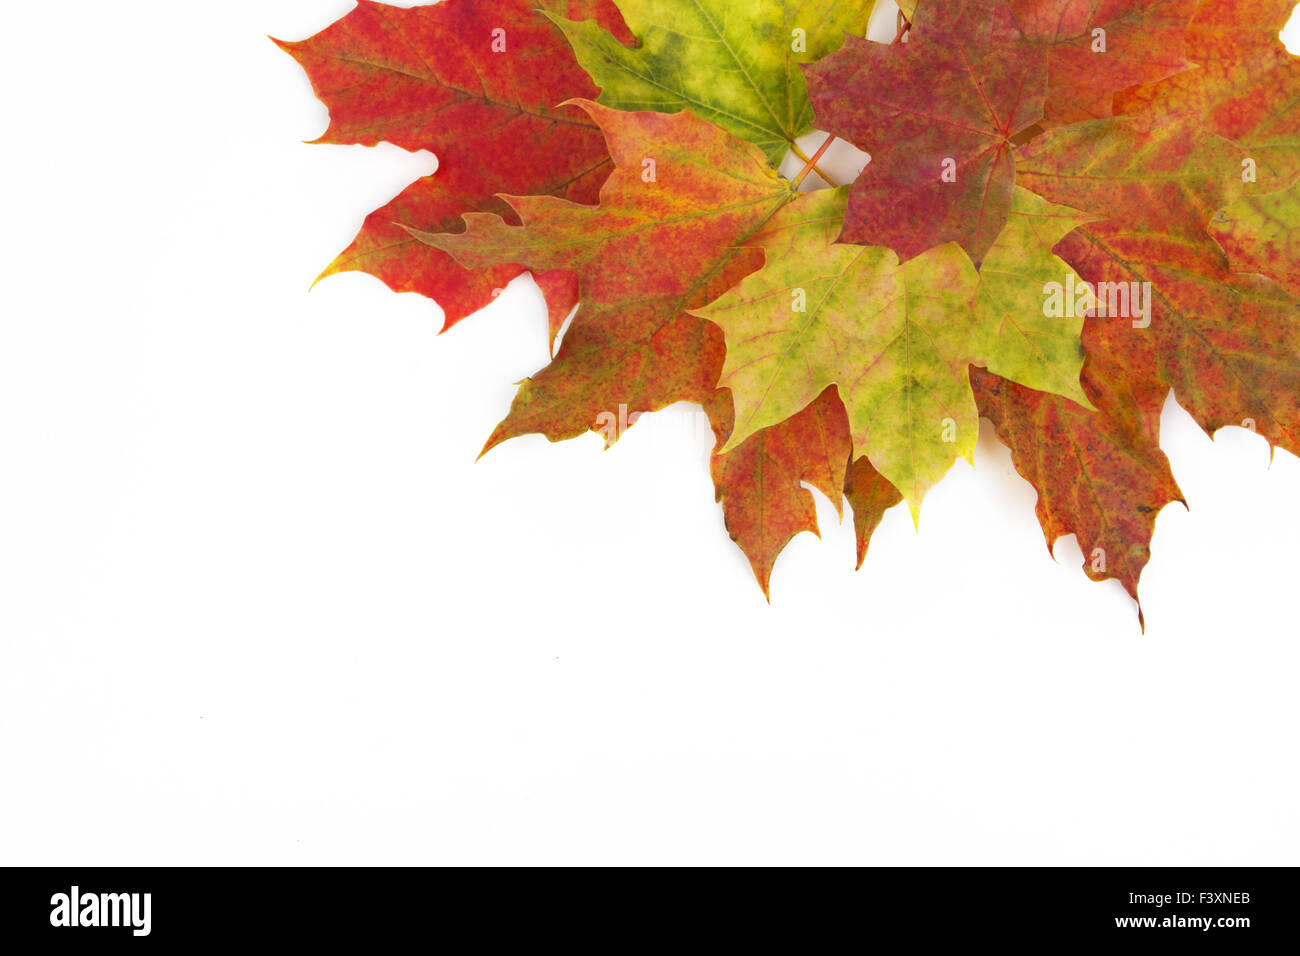 Autumn leaves isolated with white background Stock Photo